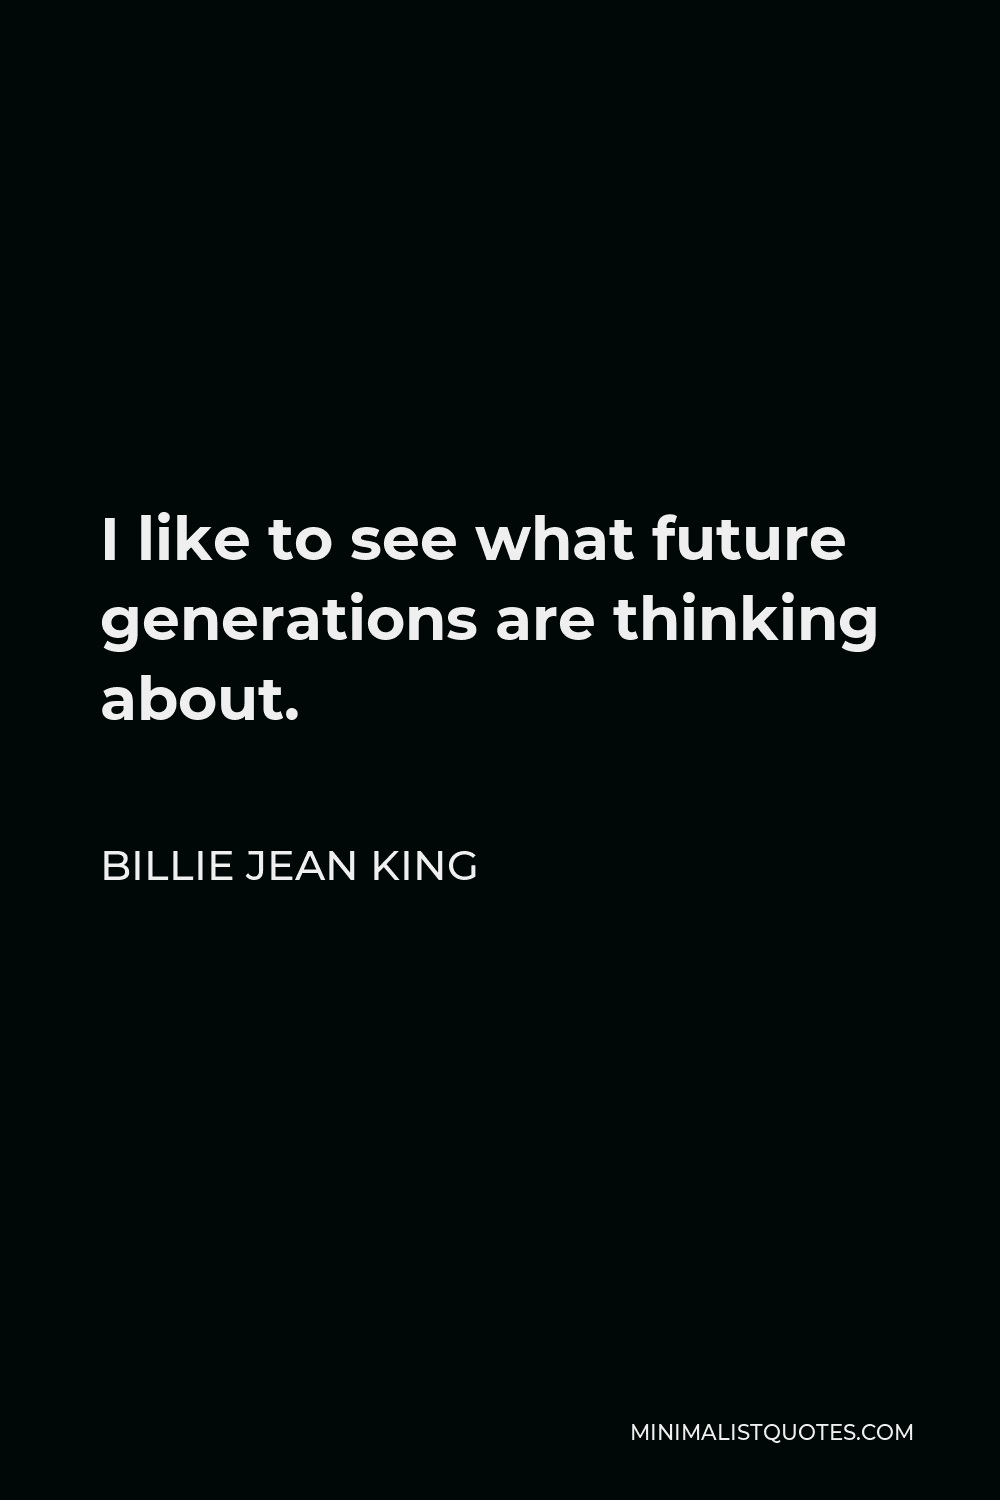 Billie Jean King Quote - I like to see what future generations are thinking about.